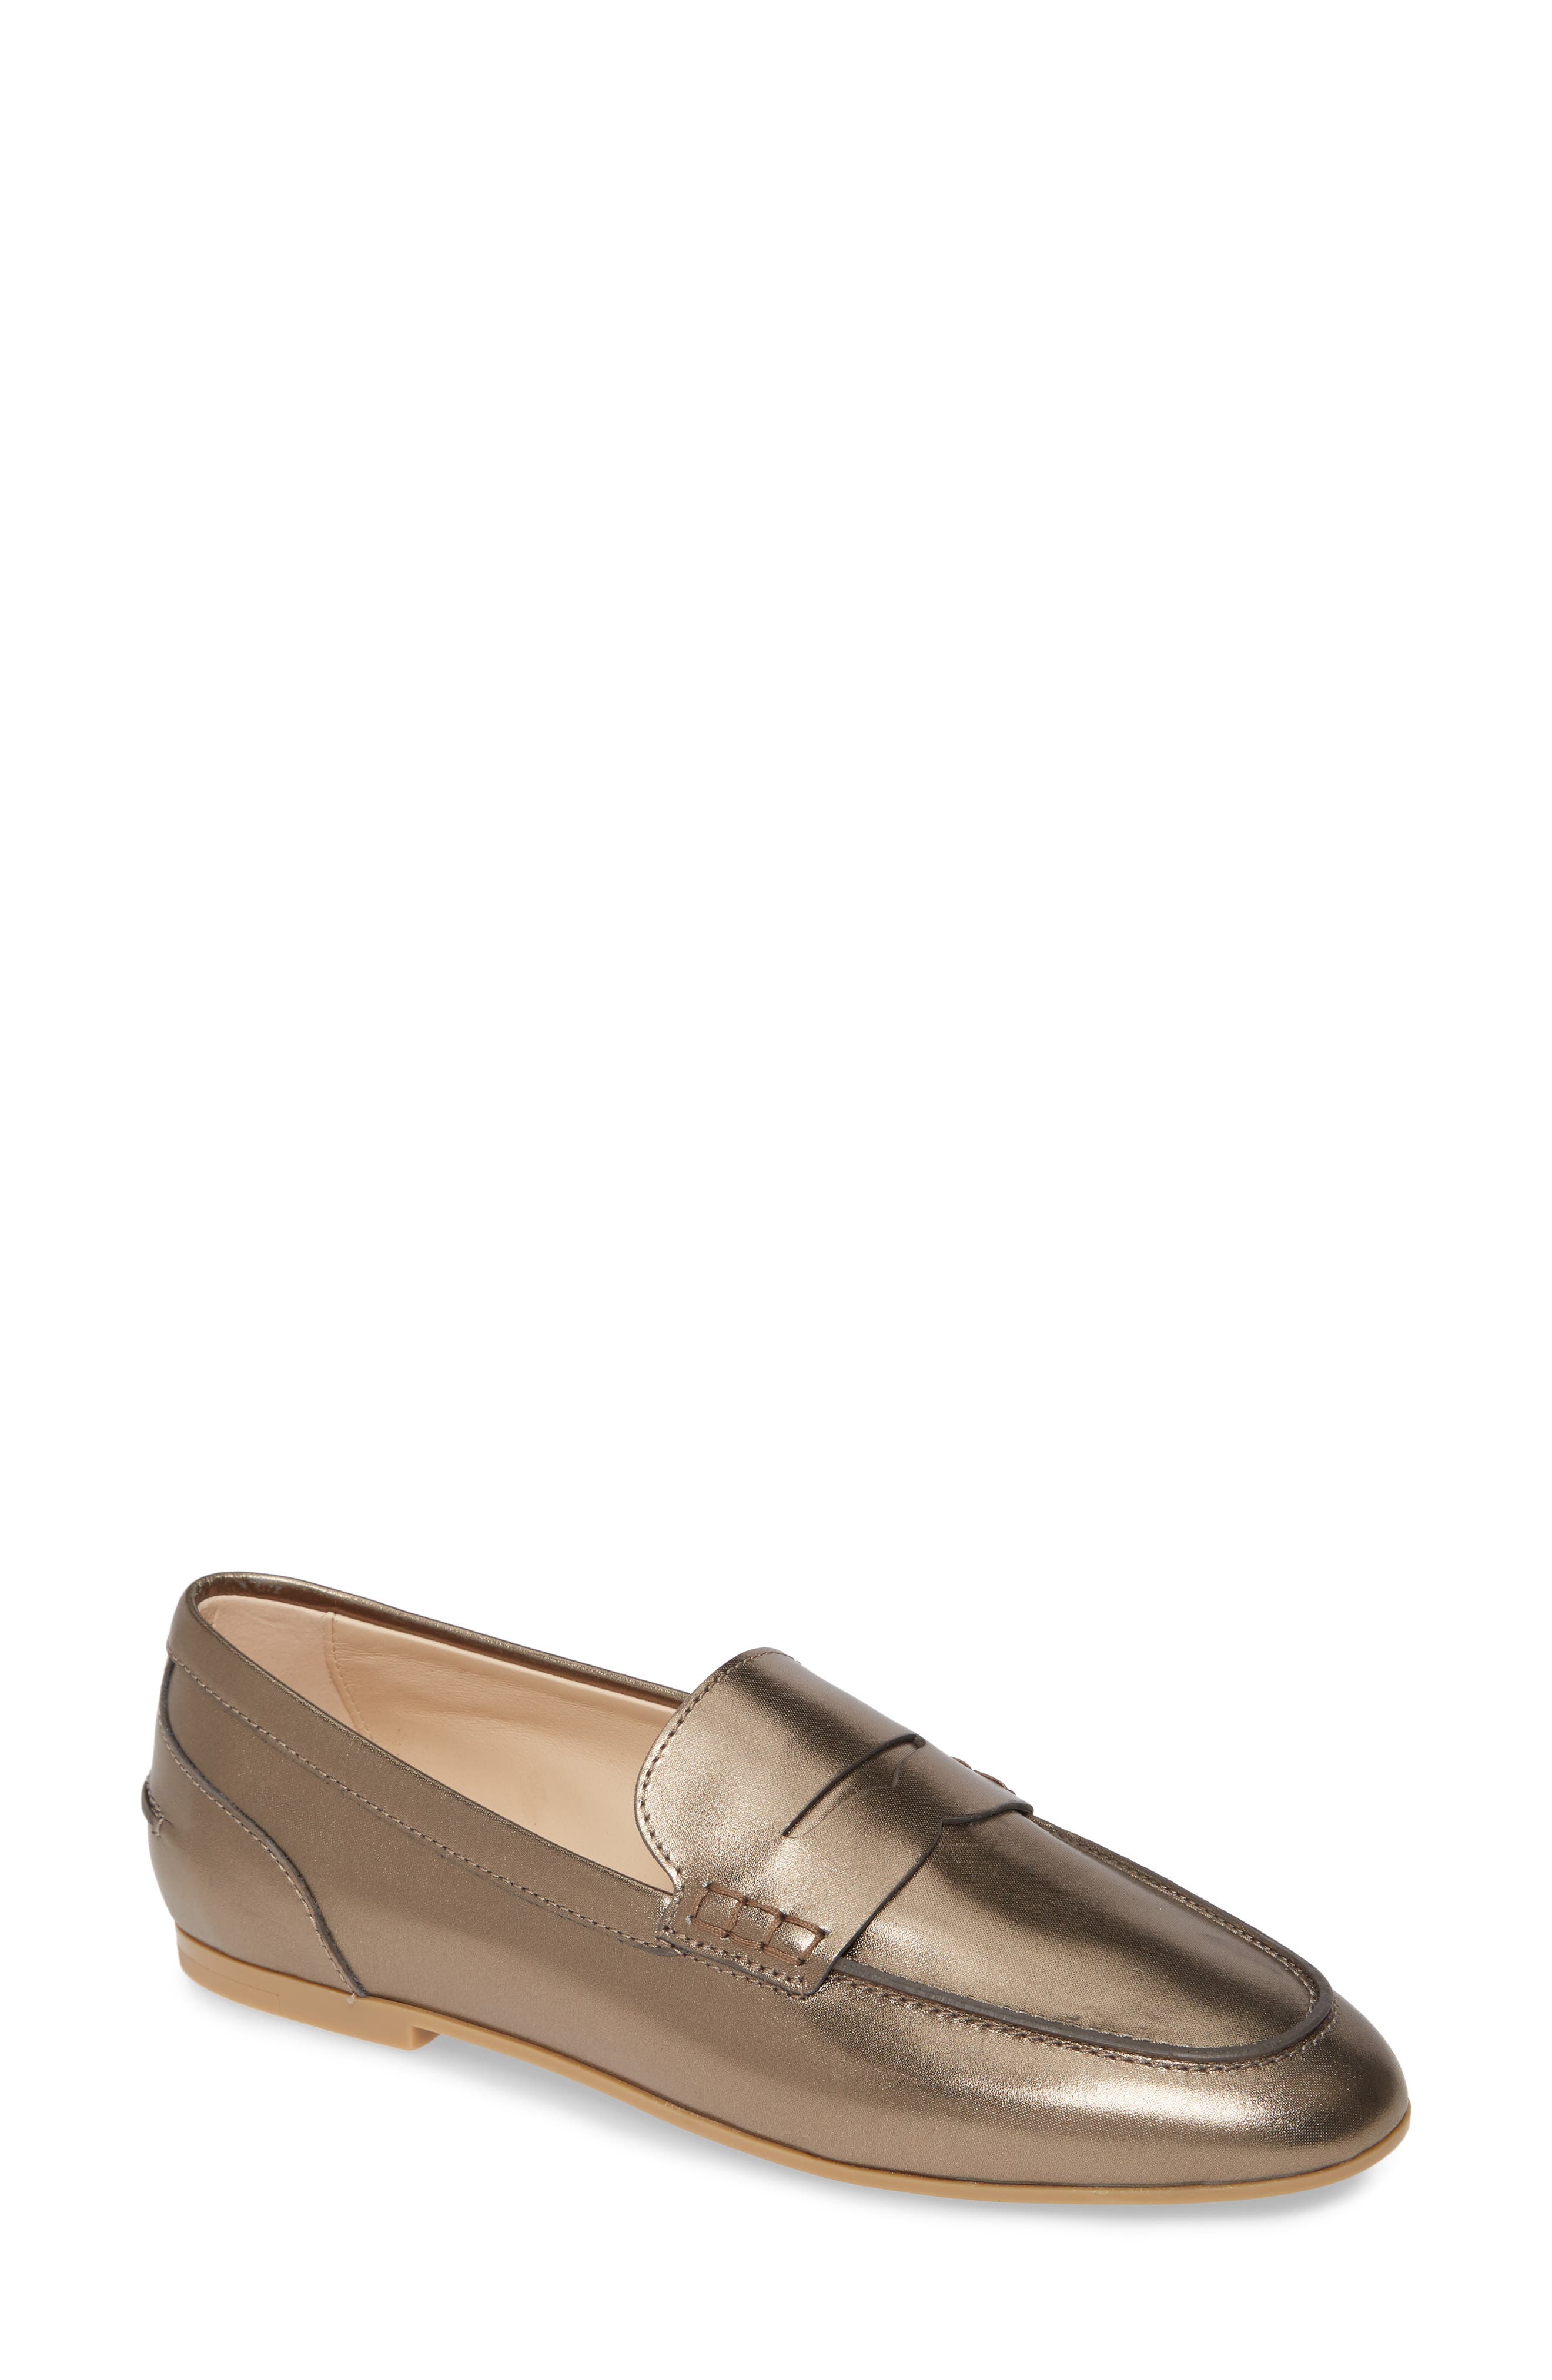 penny loafers nordstrom